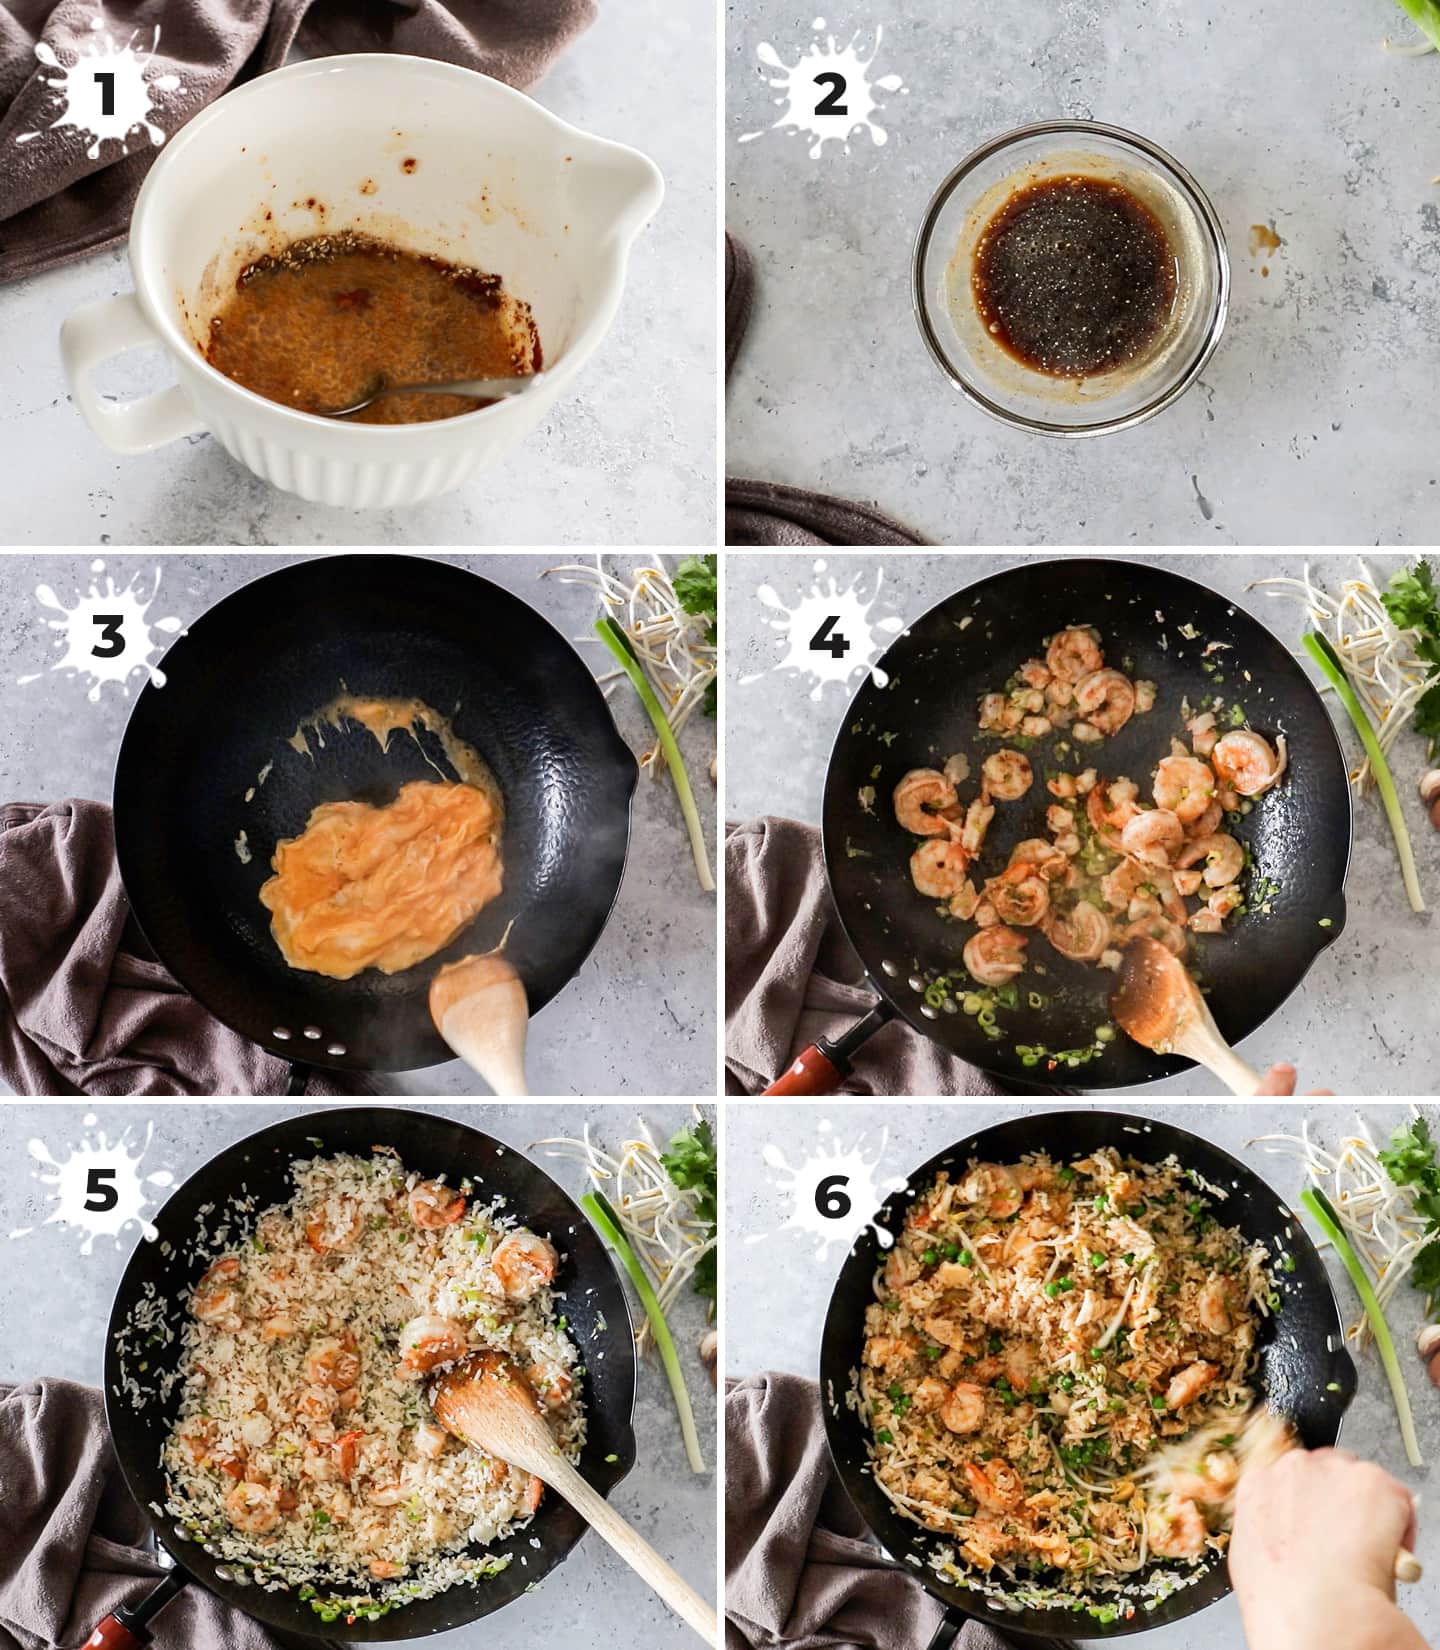 A collage of 6 images showing how to make prawn fried rice.